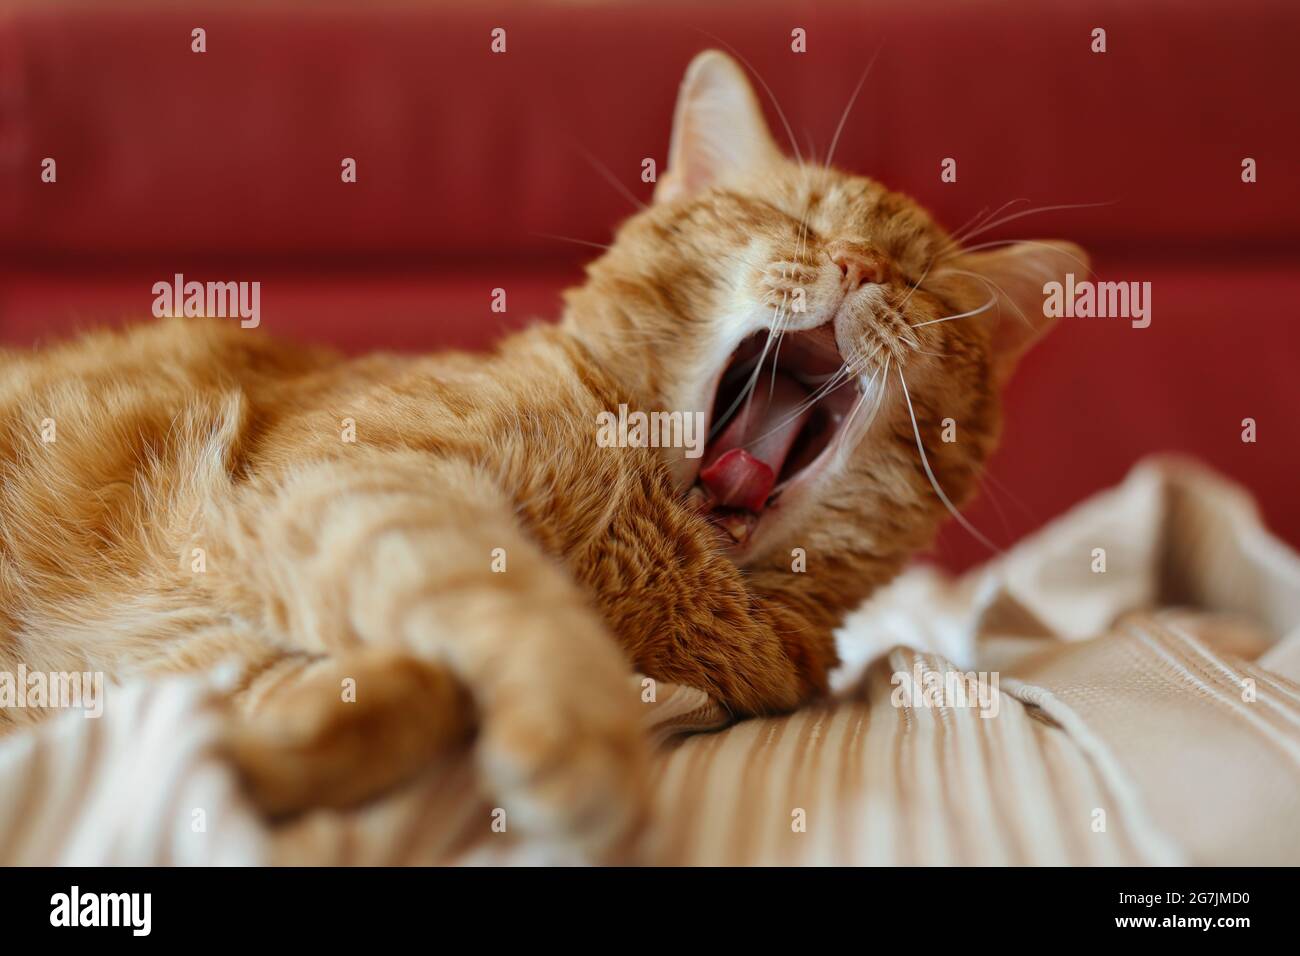 Yawning Ginger Tabby Cat on Sofa. Sleepy Orange Cat Indoors. Tired Red Domestic Animal on Couch. Stock Photo